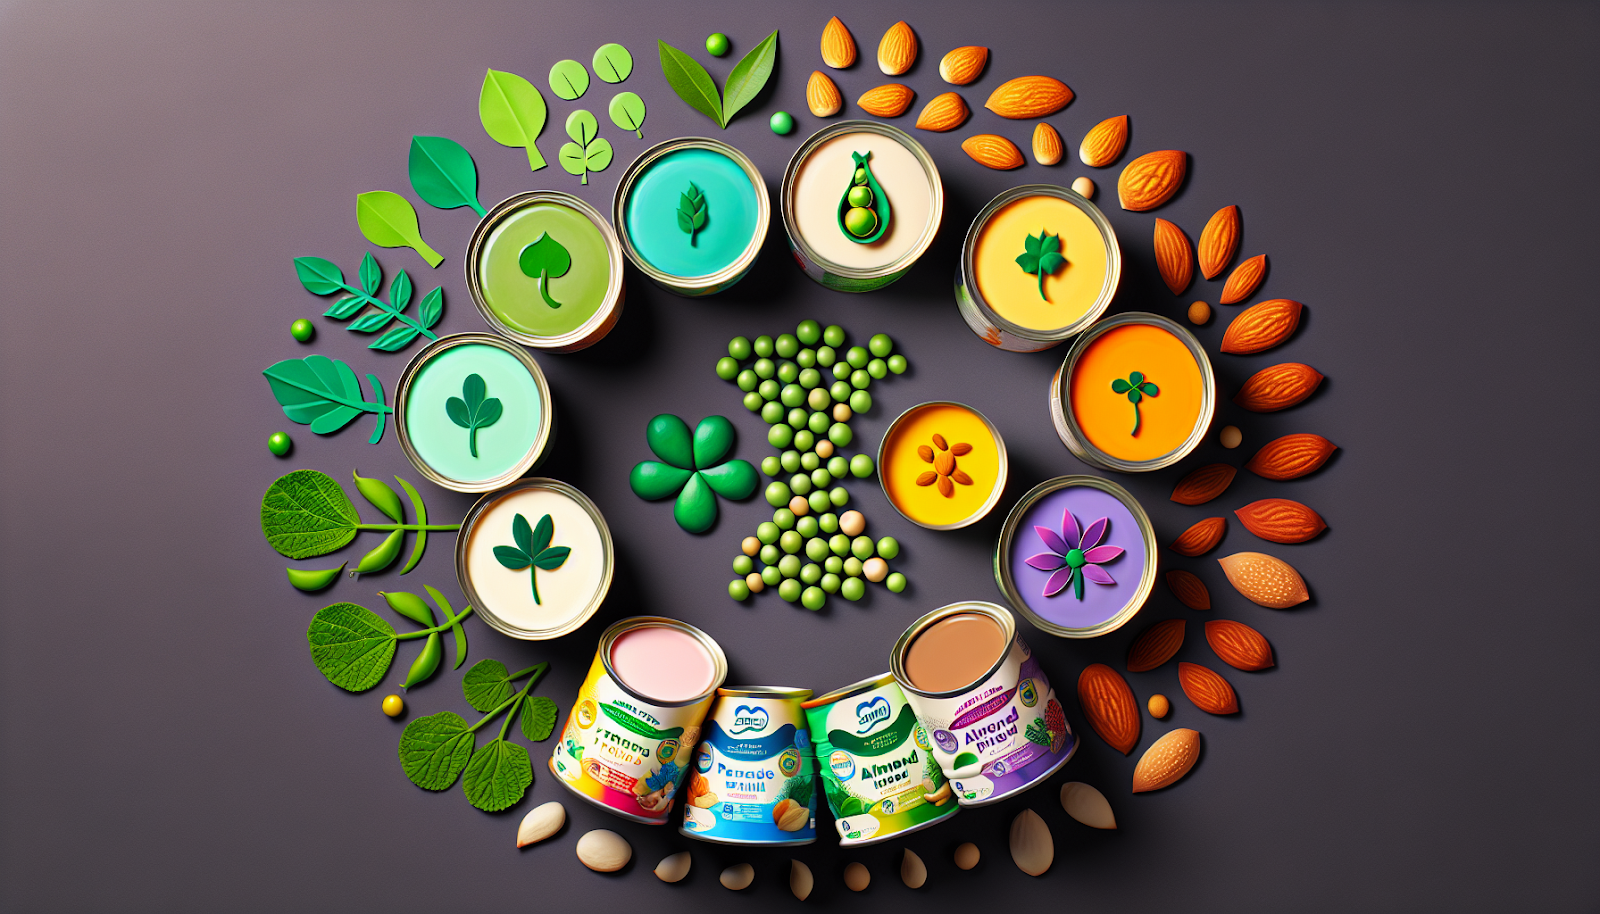 Creative display of plant-based milk products surrounded by ingredients like almonds and peas, arranged in a colorful pattern on a dark background